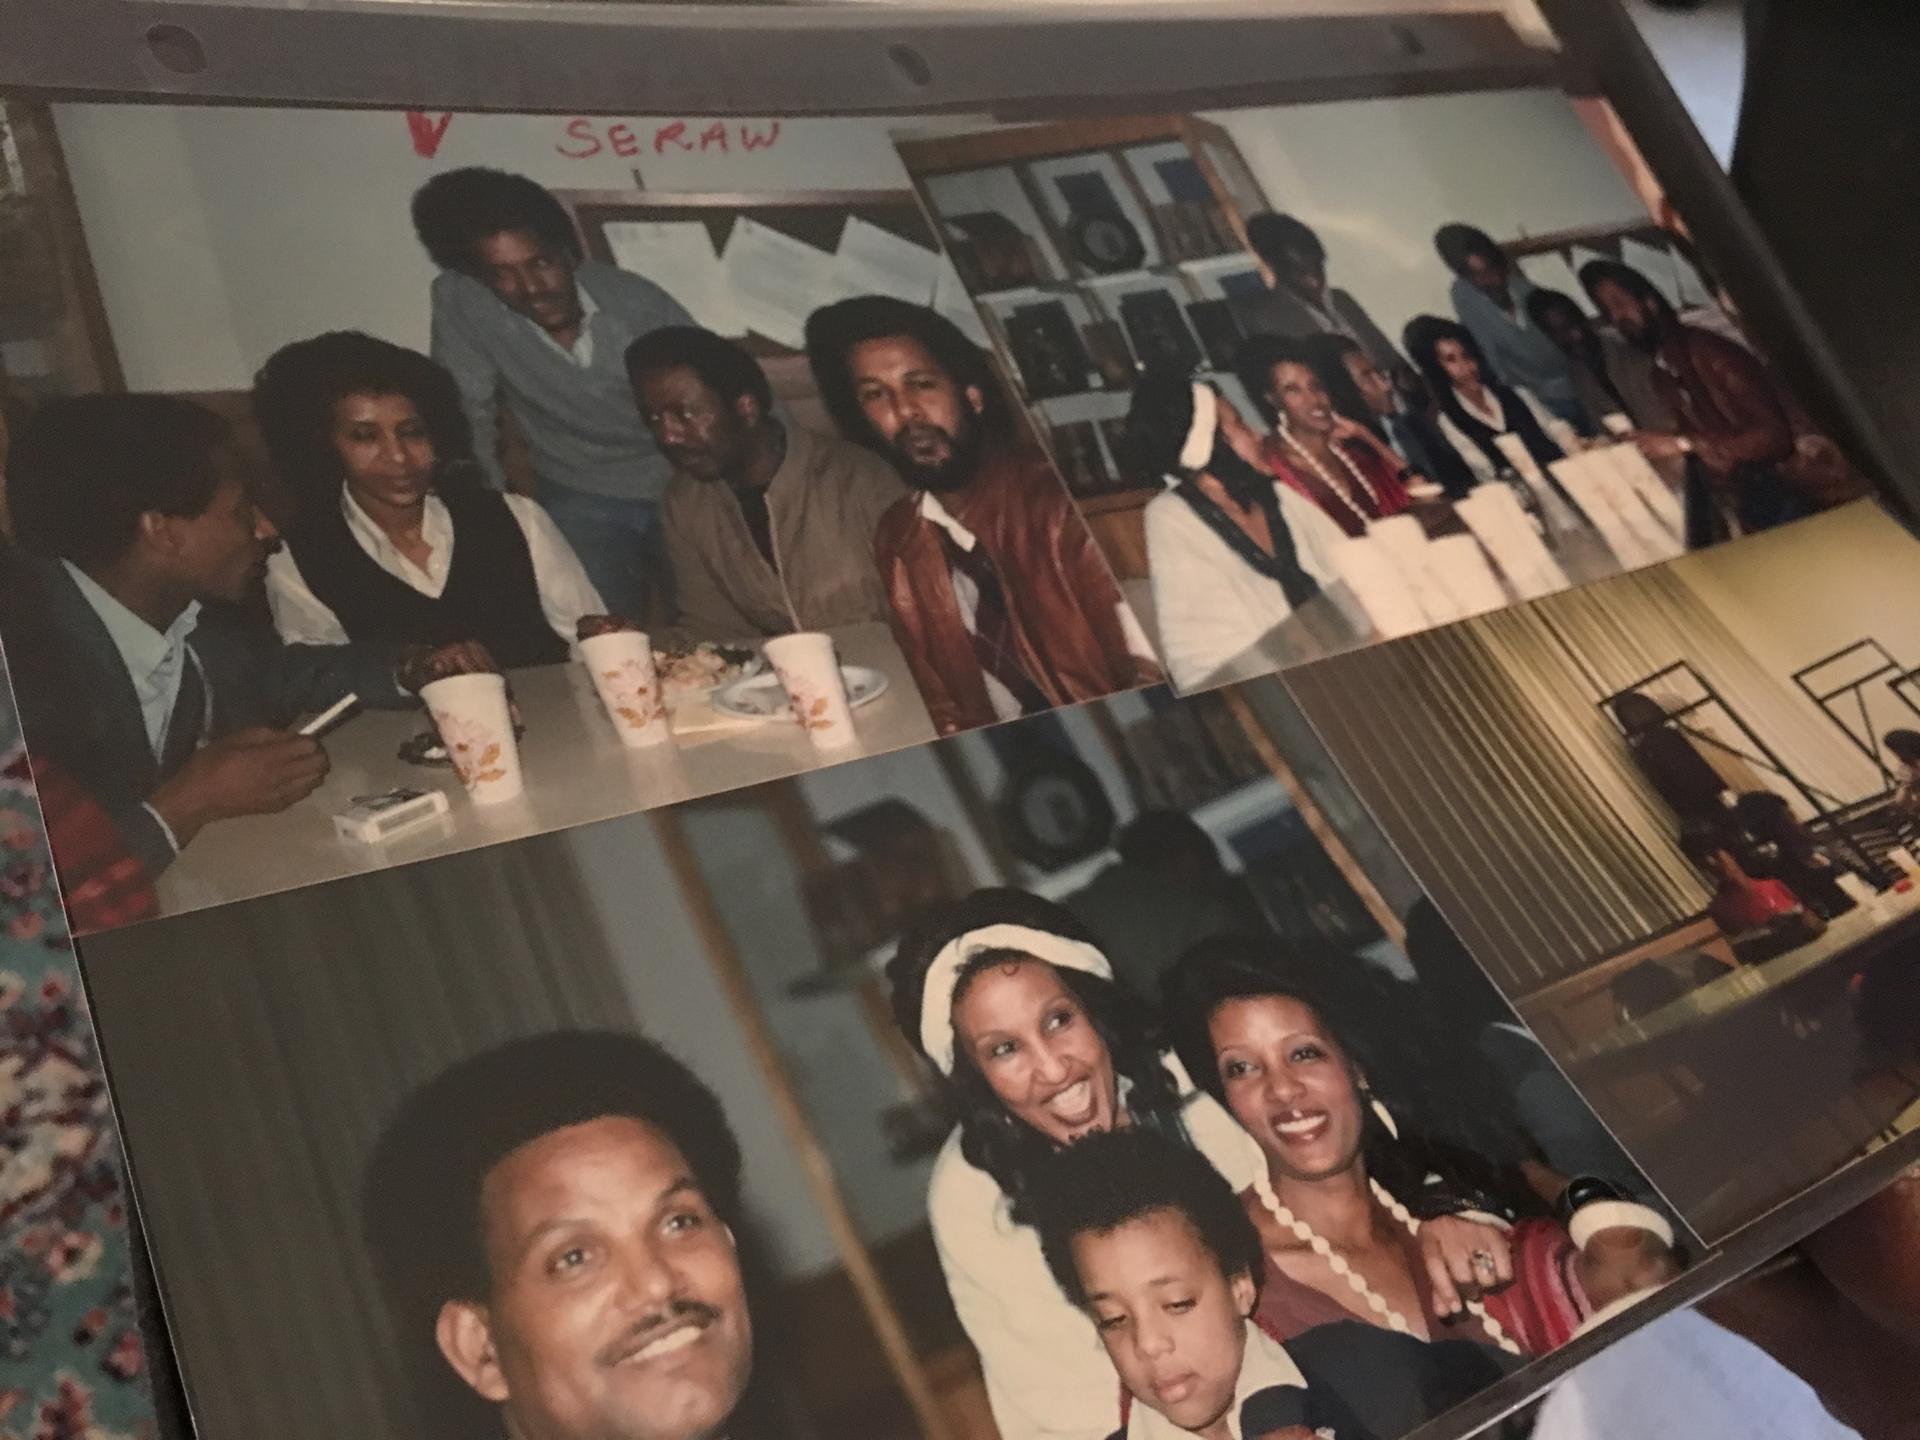 Endeyu Kendie holds pictures of the Portland Ethiopian community in the 1980s, including Mulugeta Seraw, a 28-year-old who became an integral part of the city's racial history.